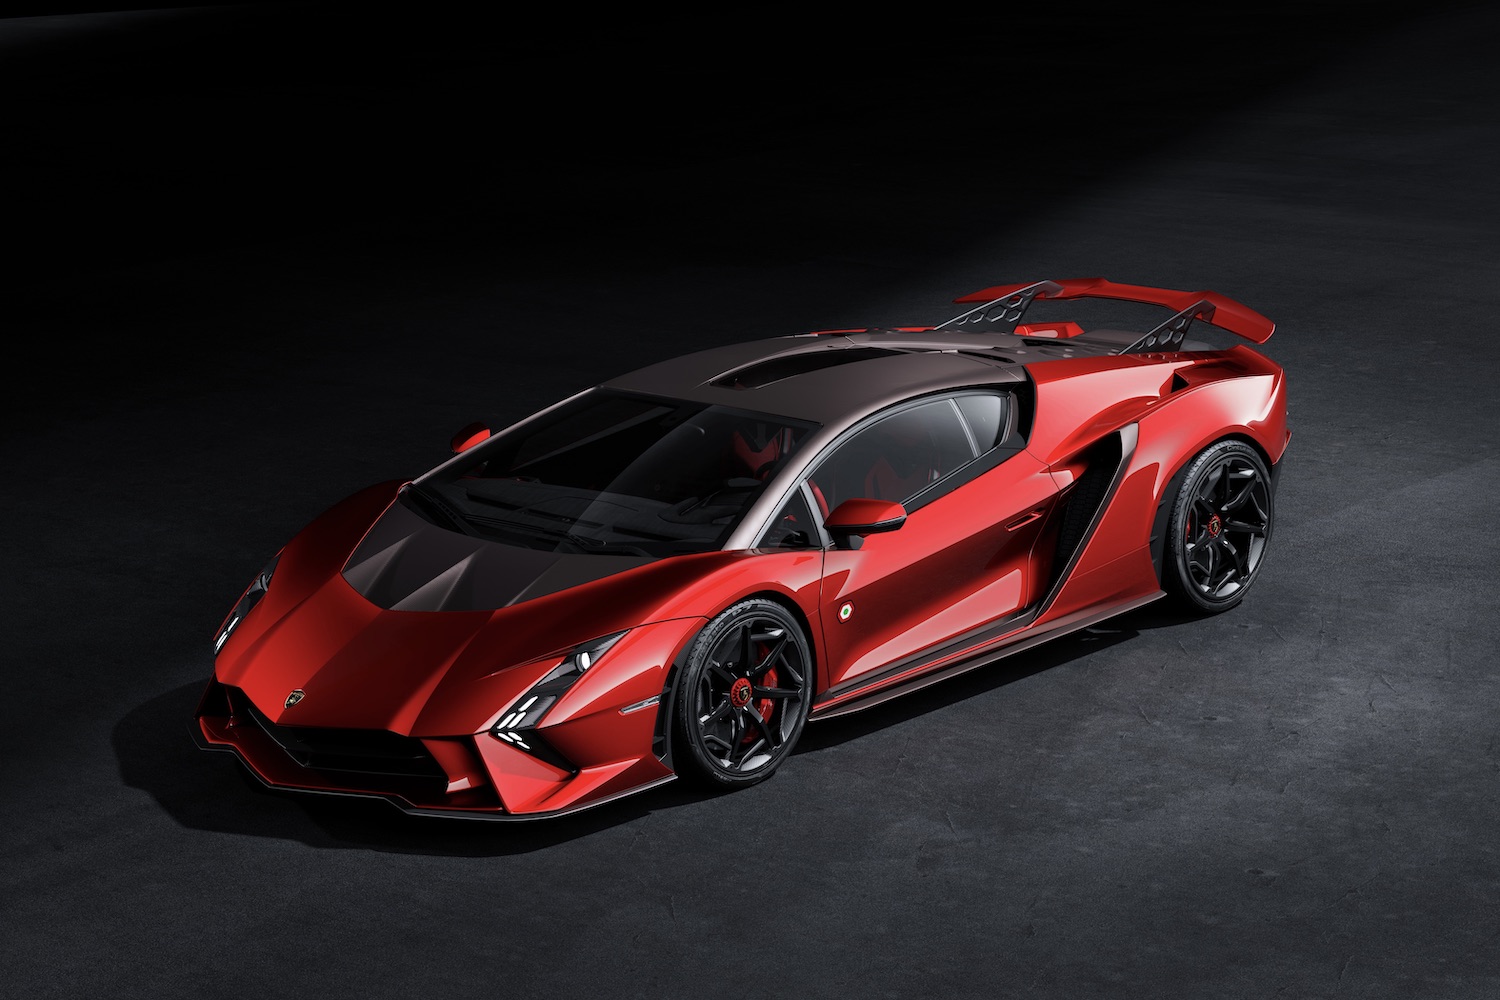 Front end angle of Lamborghini Invencible from driver's side in a dark studio with studio lighting.